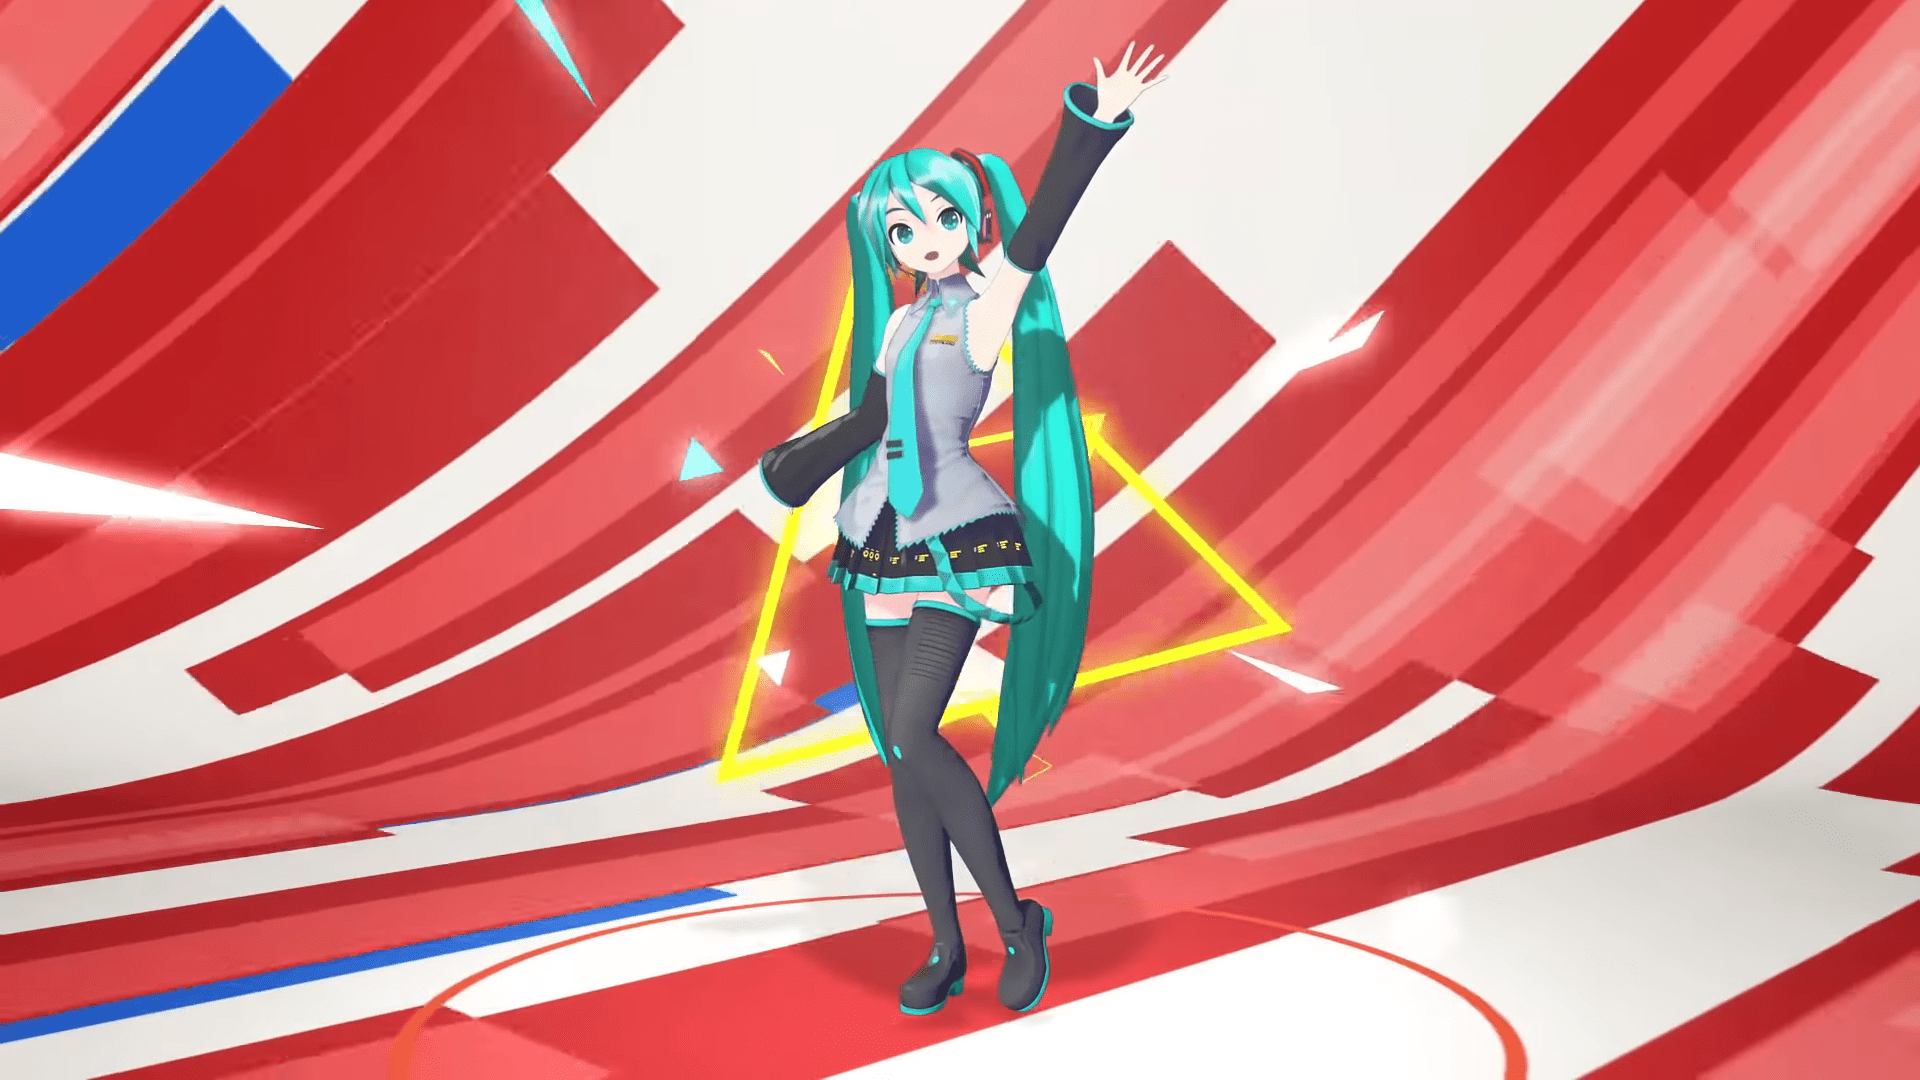 The VOCALOIDs Are Coming To The Switch In Hatsune Miku Project